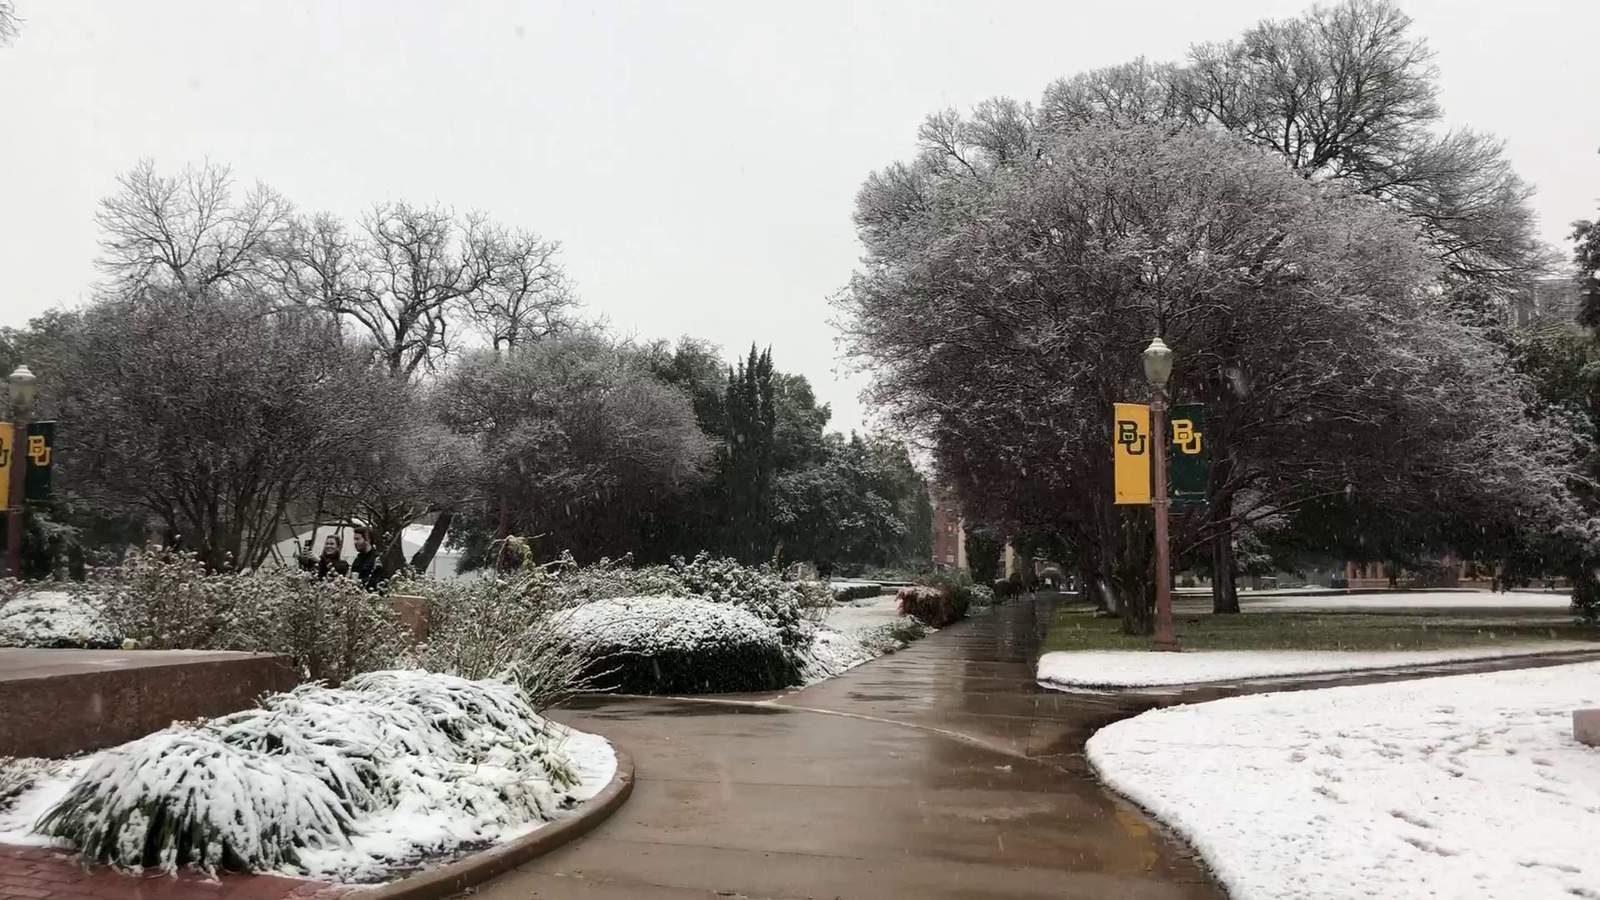 ‘Waco is a wonderland’: See photos, videos of snow falling at Baylor University